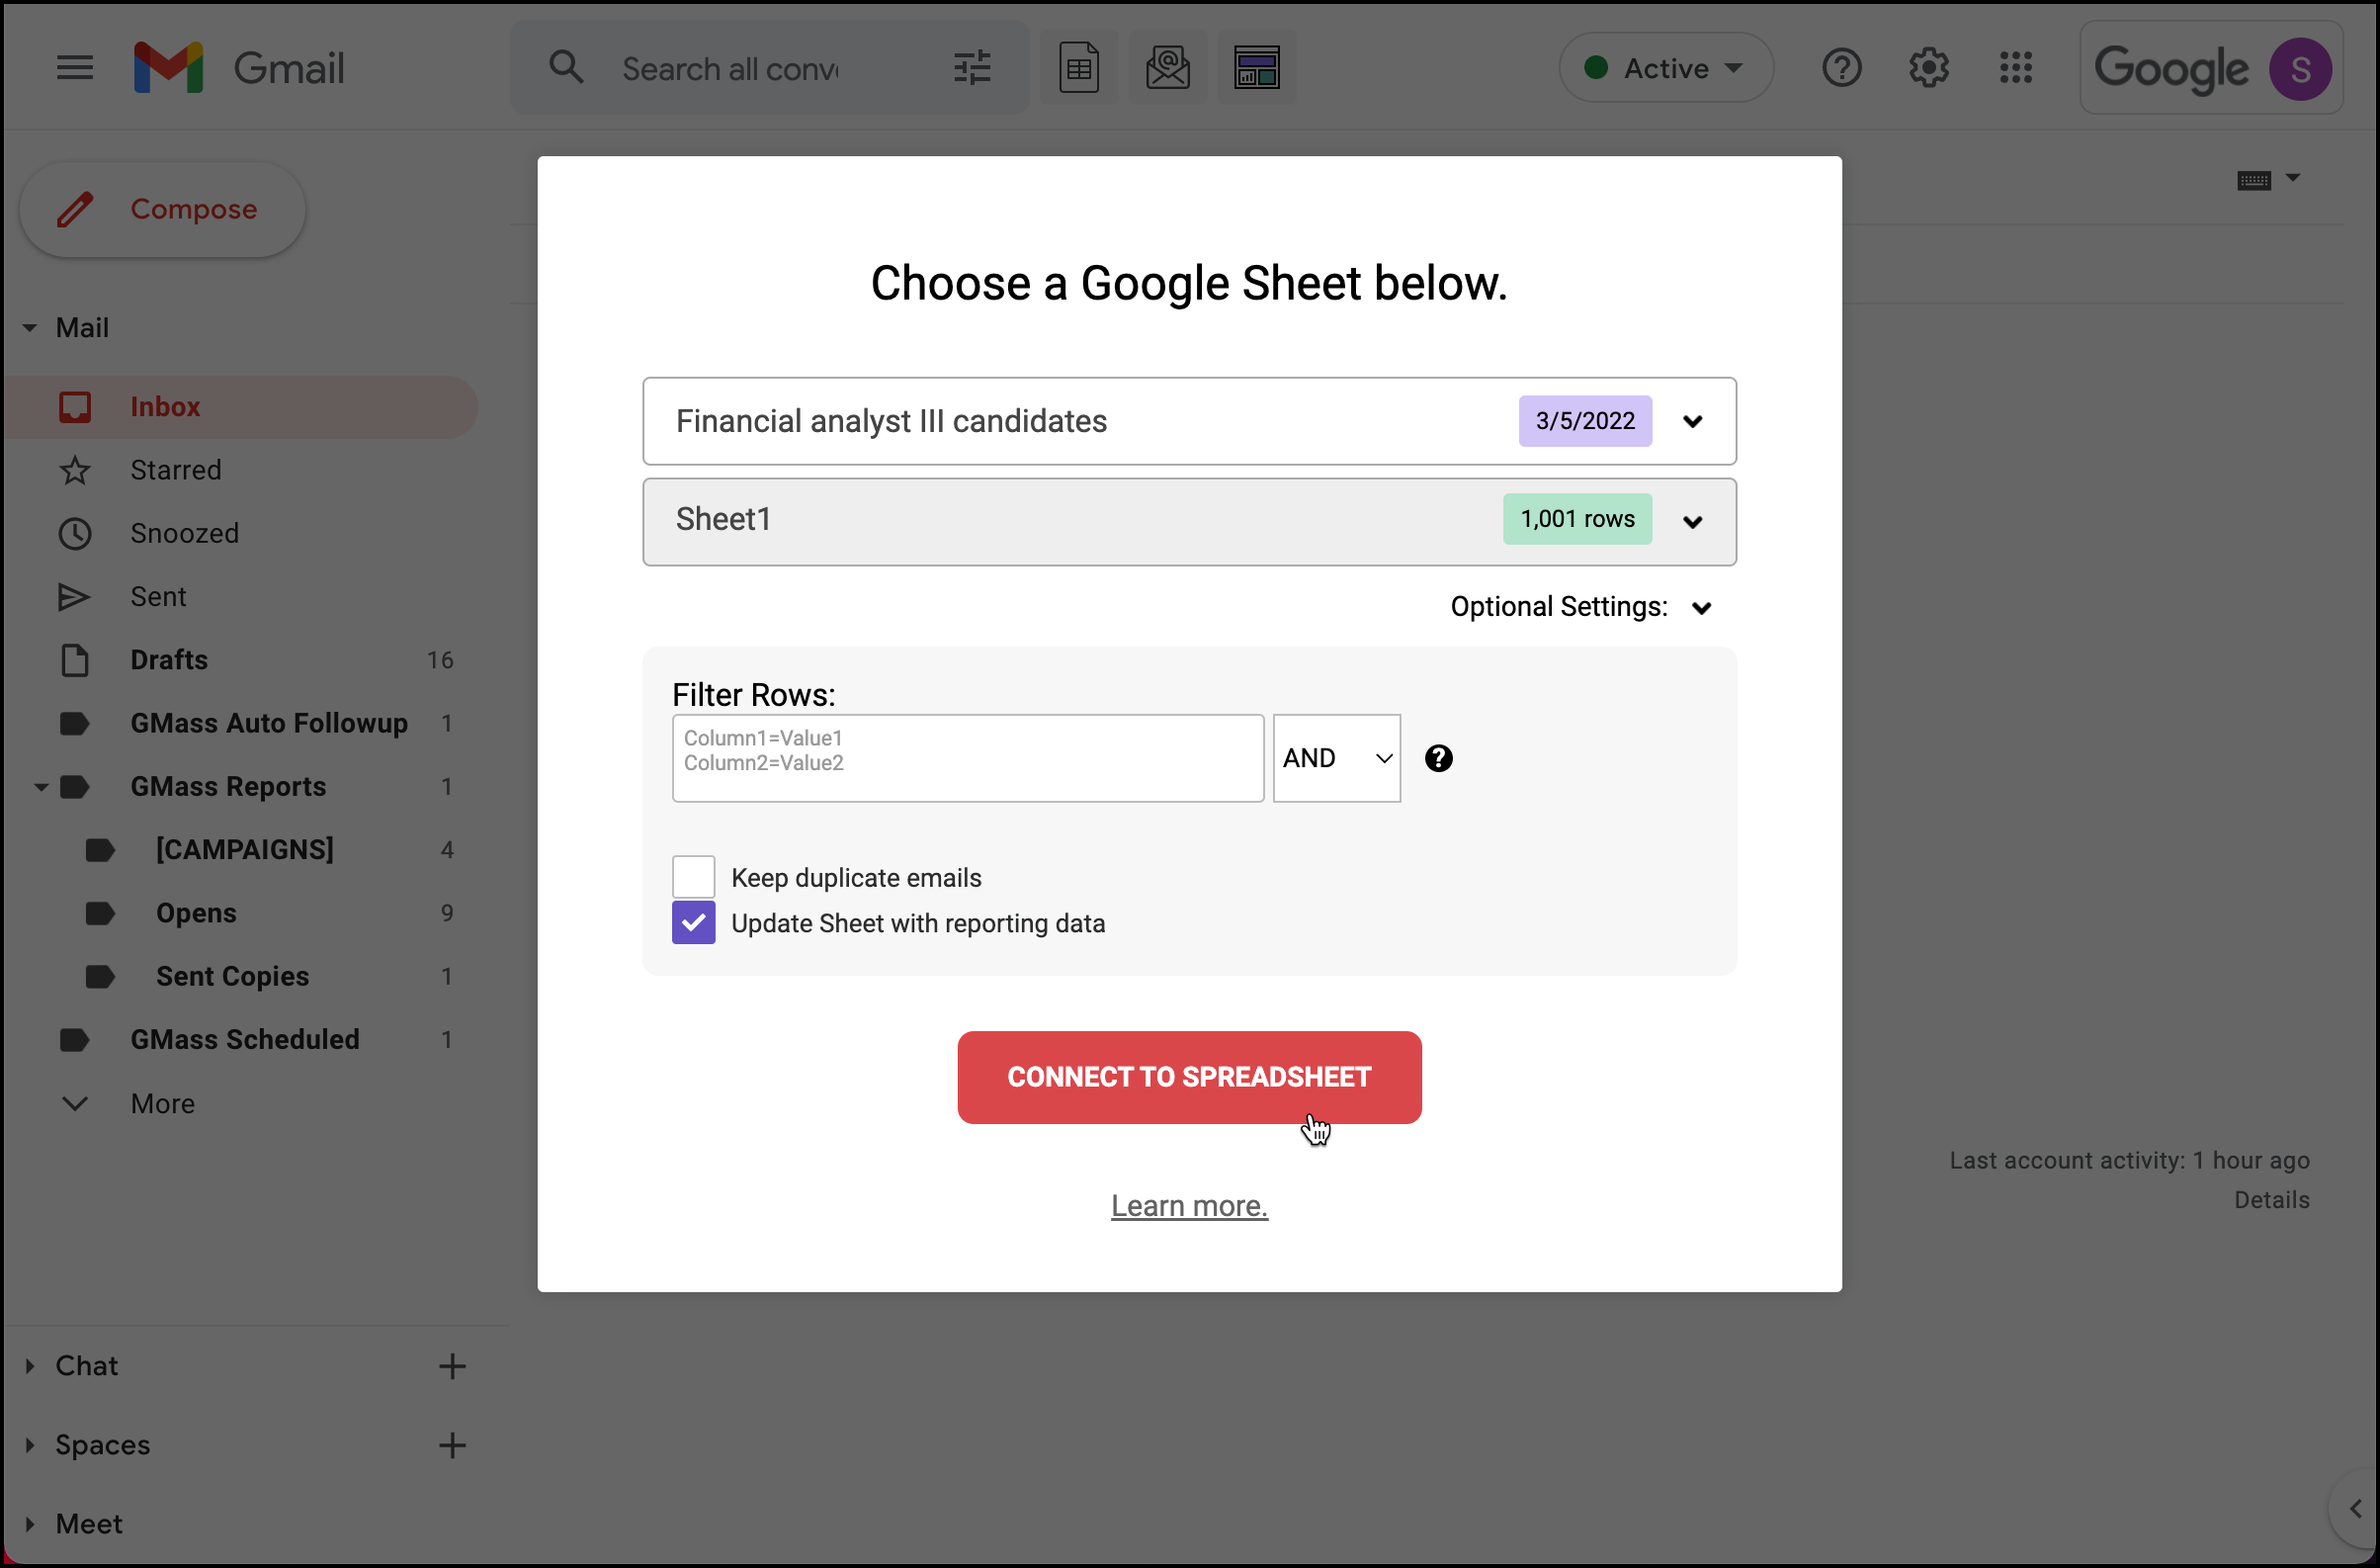 Connect your Google Sheet to GMass.